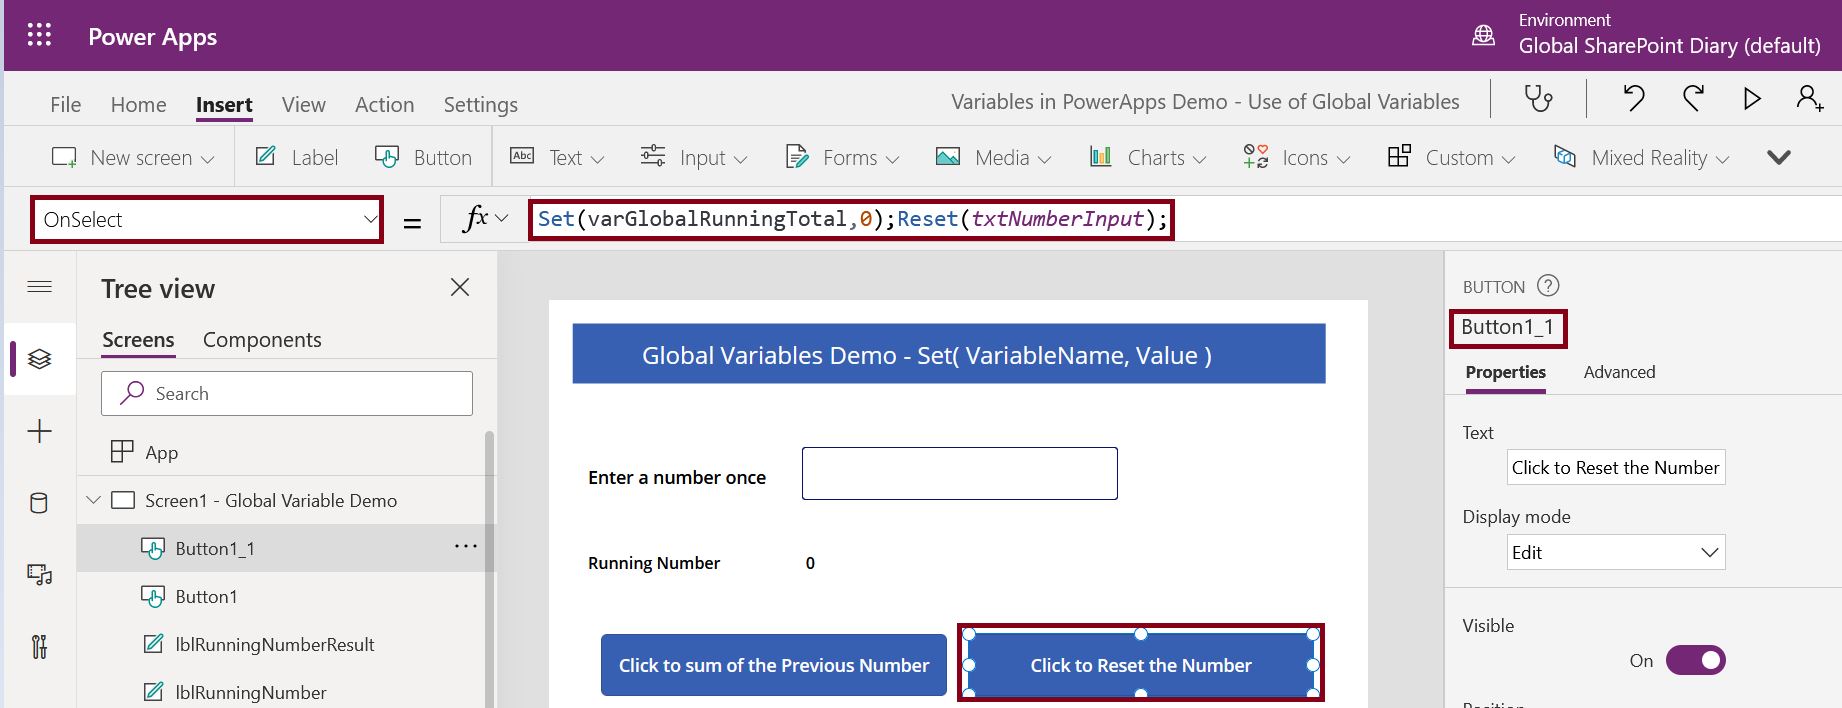 How to reset controls in PowerApps